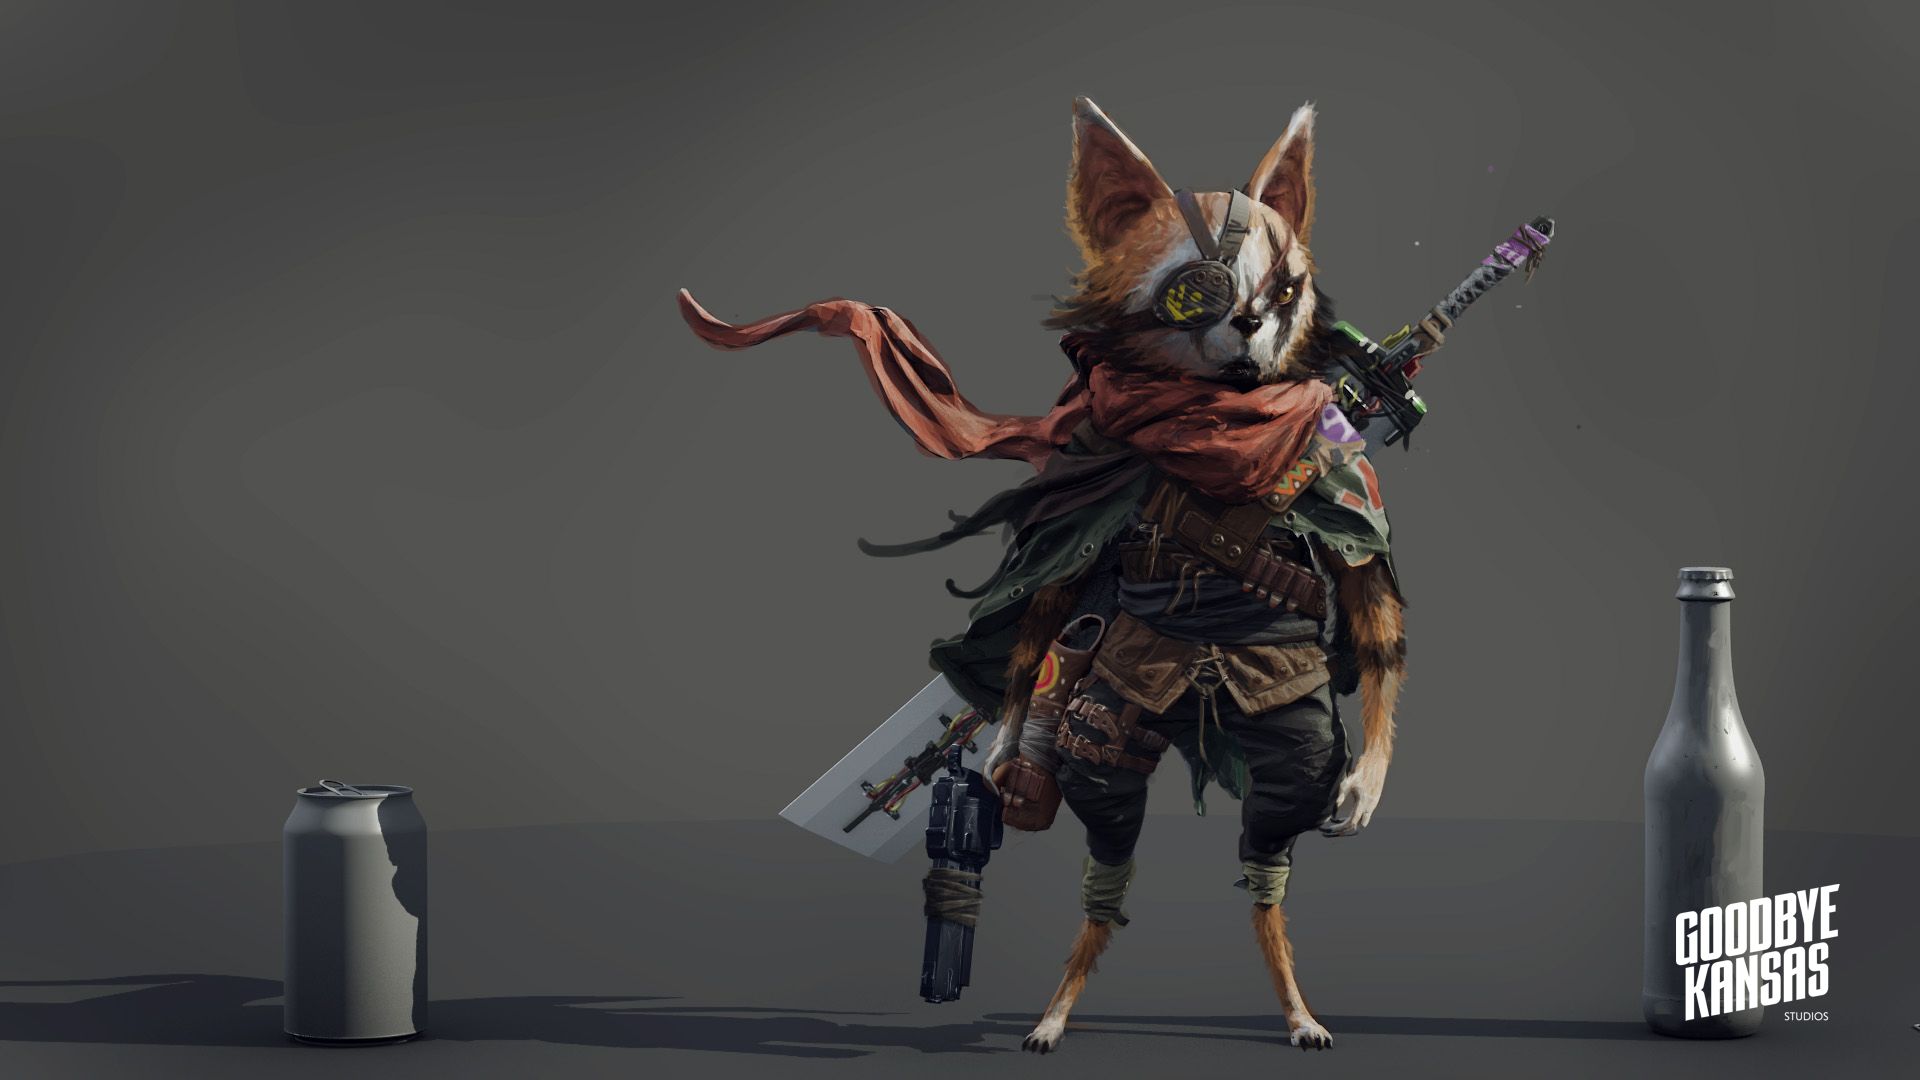 biomutant_hero_concept_withColorMarkings_160321.jpg